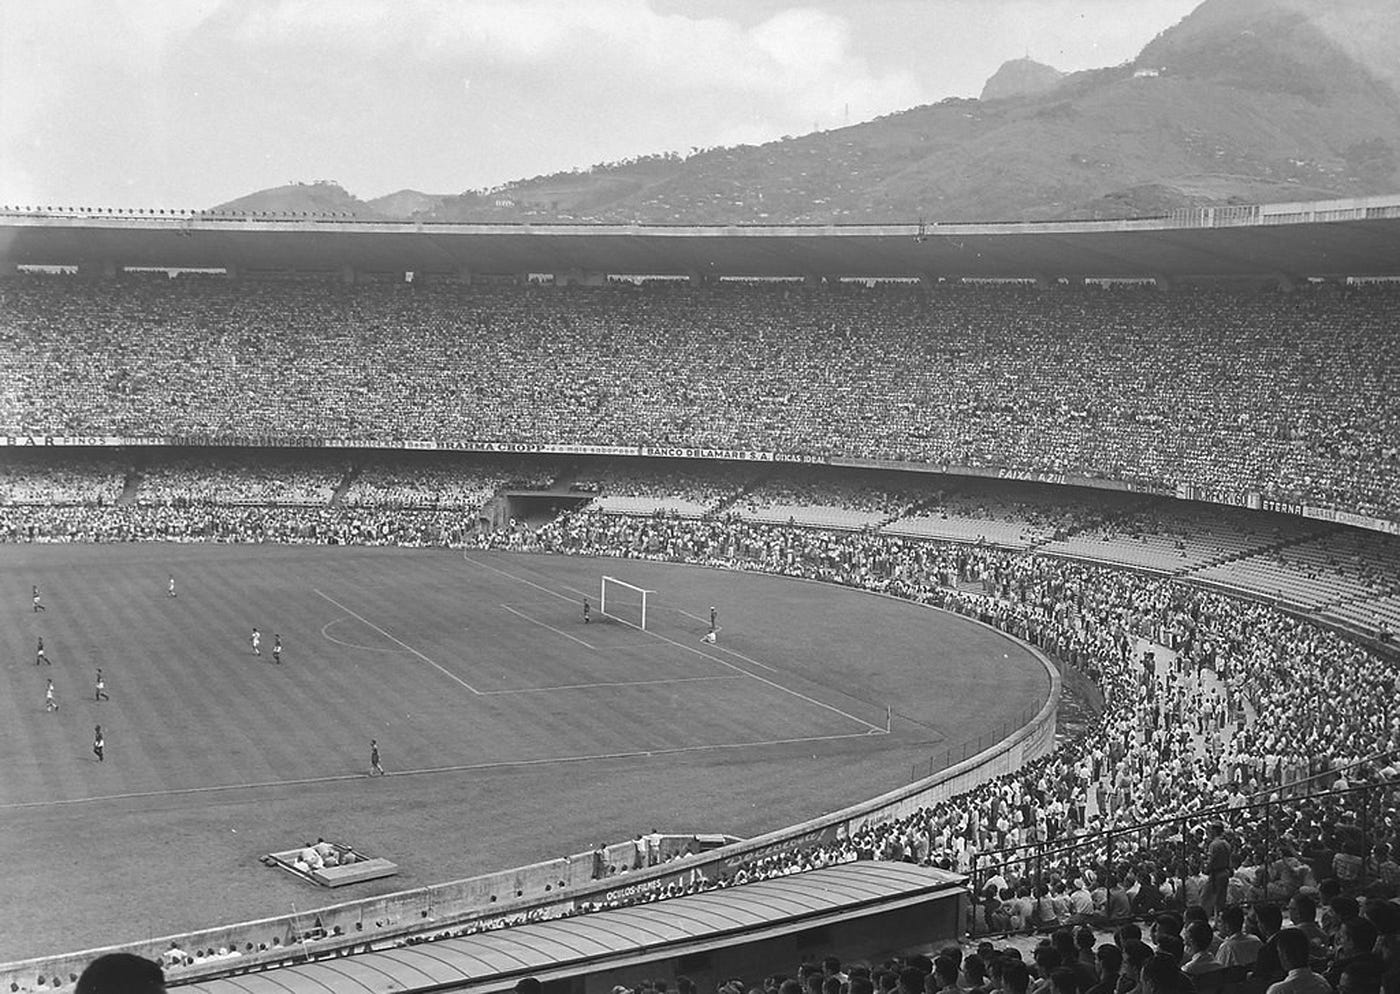 World Cup 1950: The Maracanazo. The story of soccer's biggest-ever